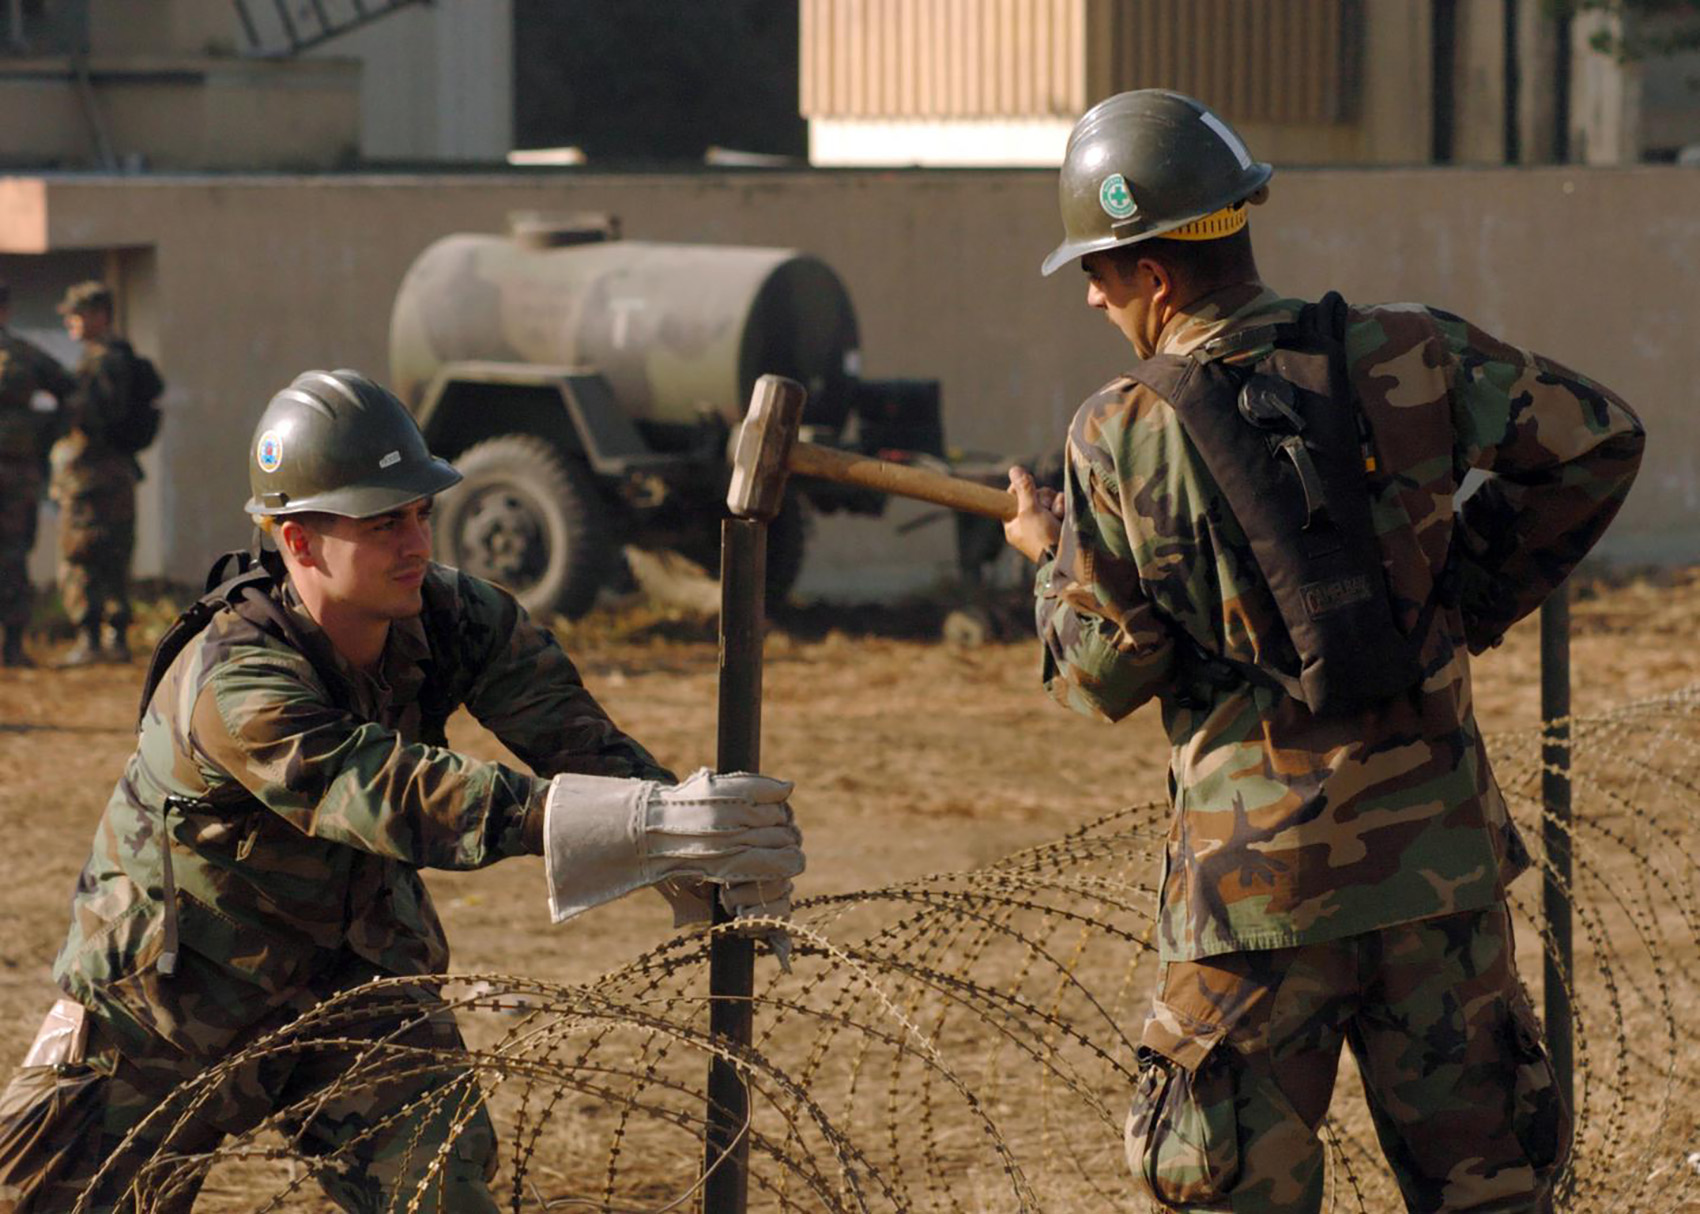 what are sledgehammers used for - navy using a sledge hammer to bang in metal fence spikes